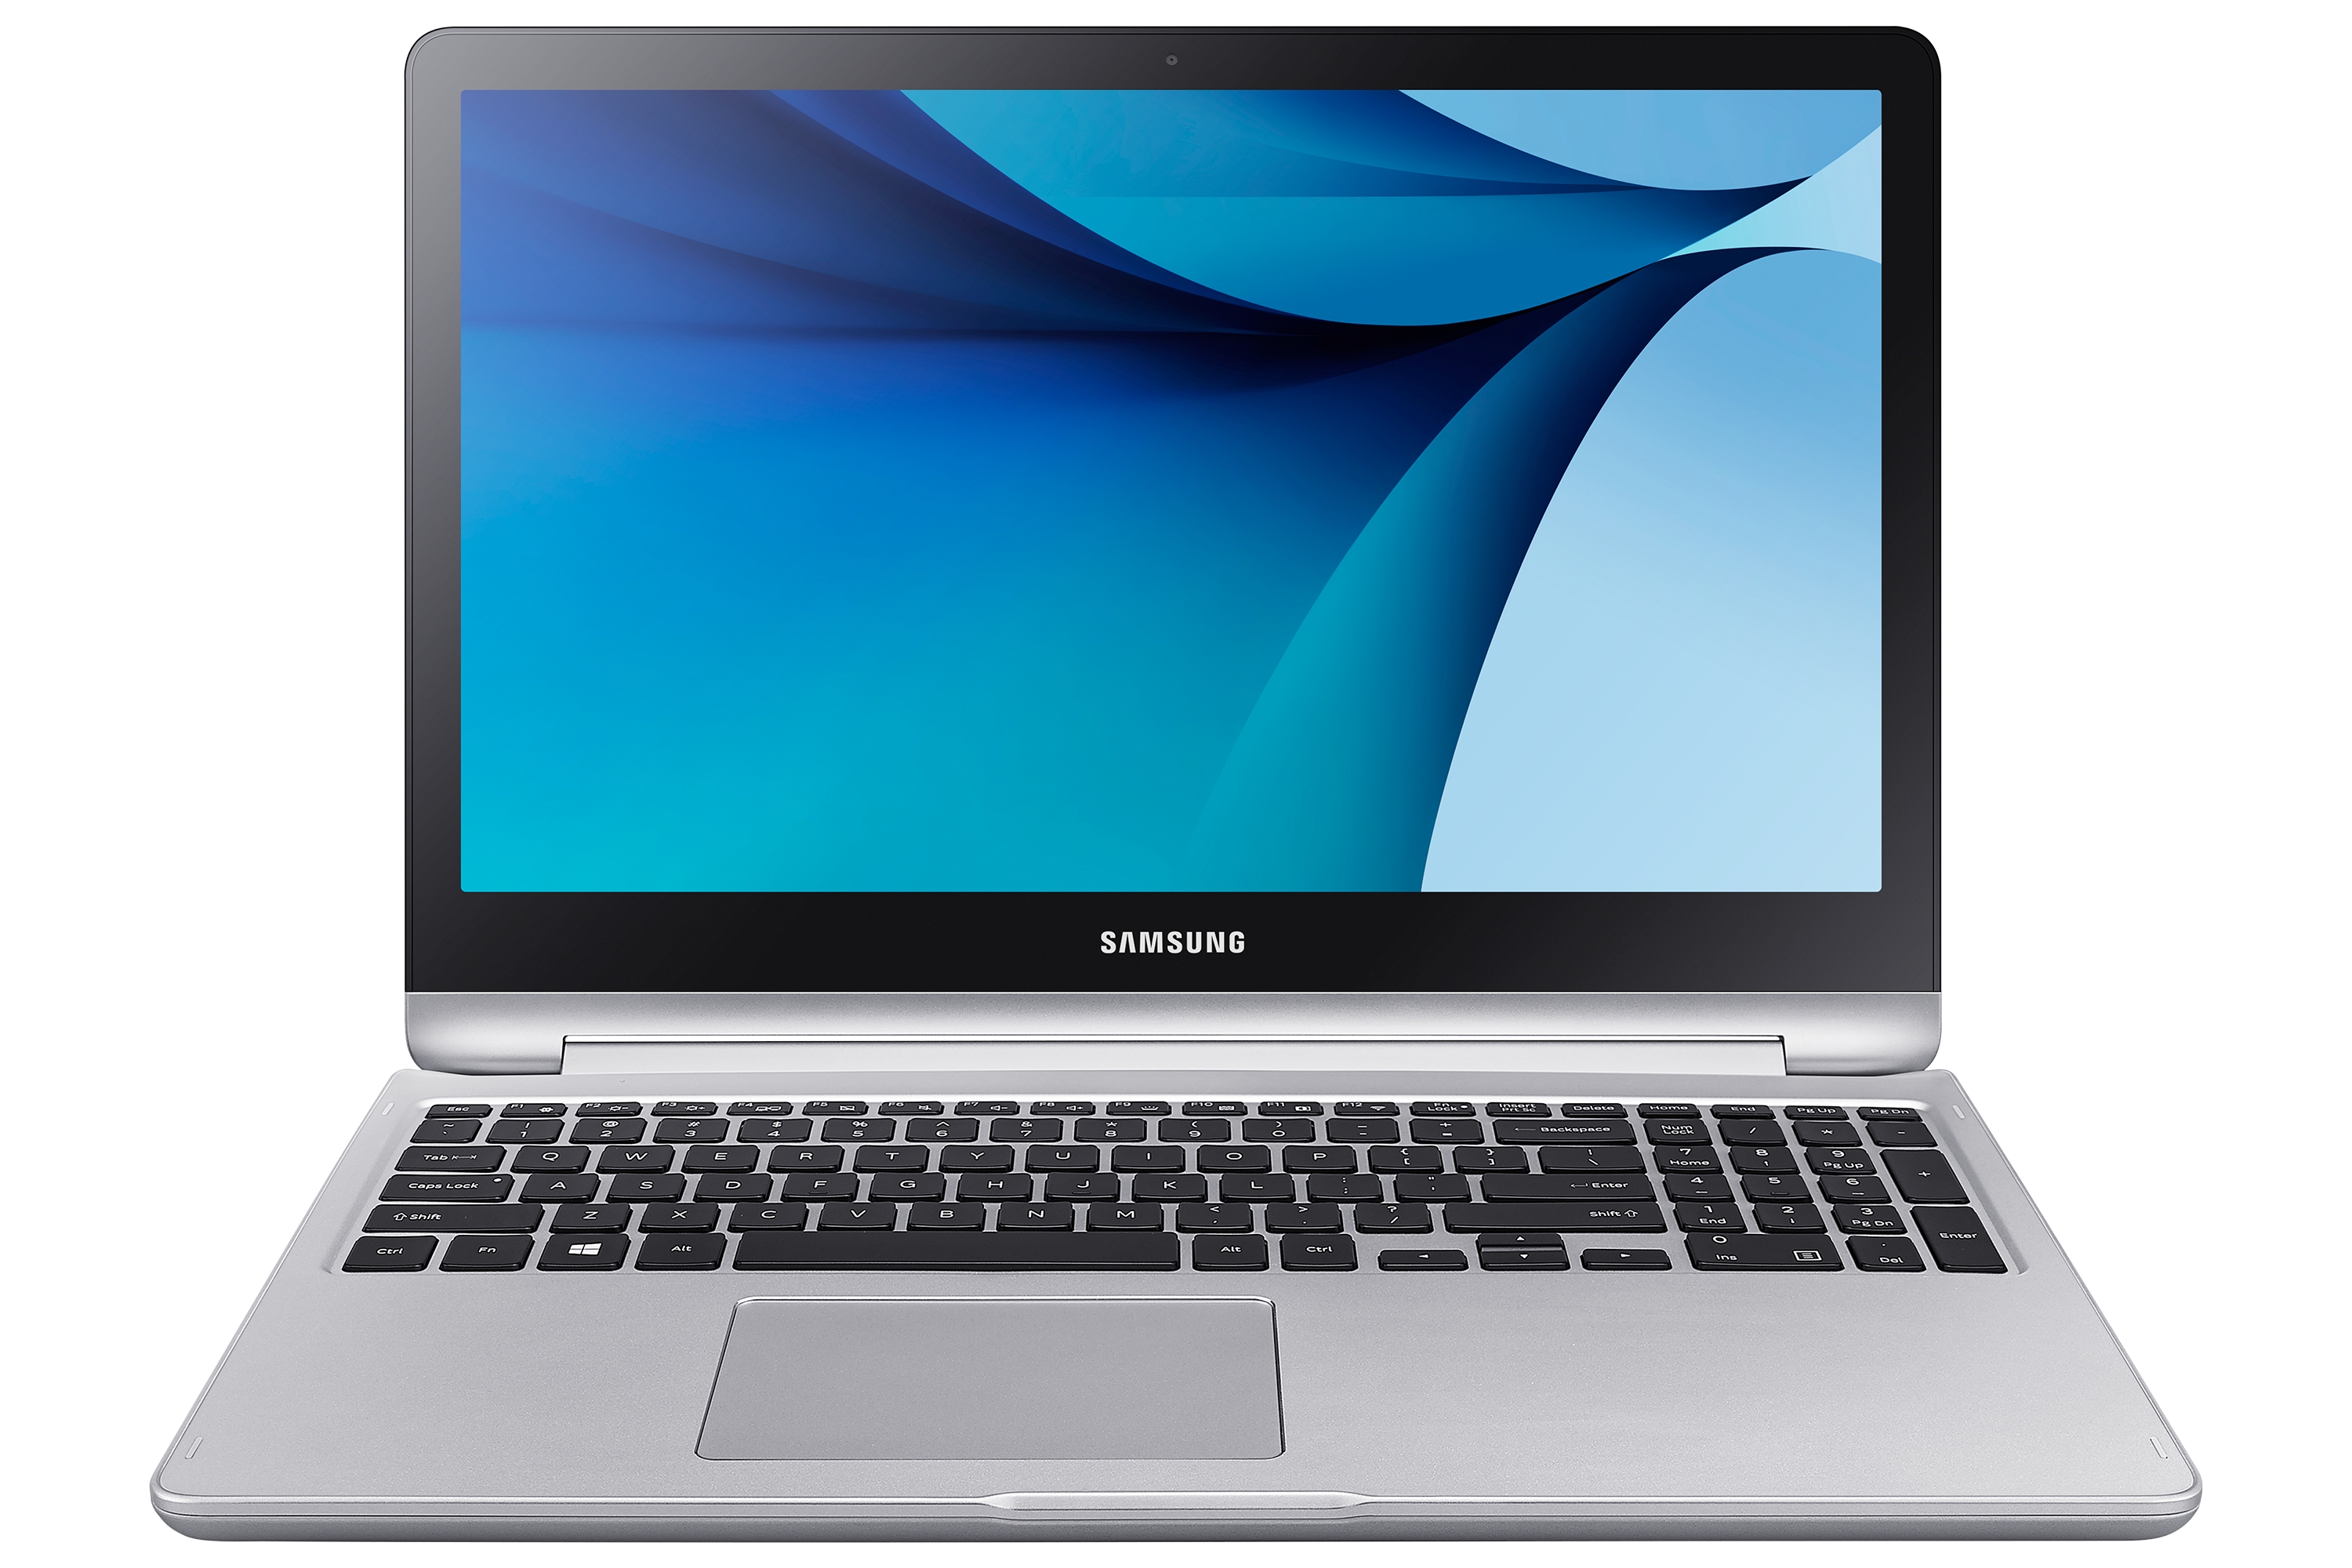 Samsung Eyes Enterprise with Notebook 7 spin, A Windows 2-in-1